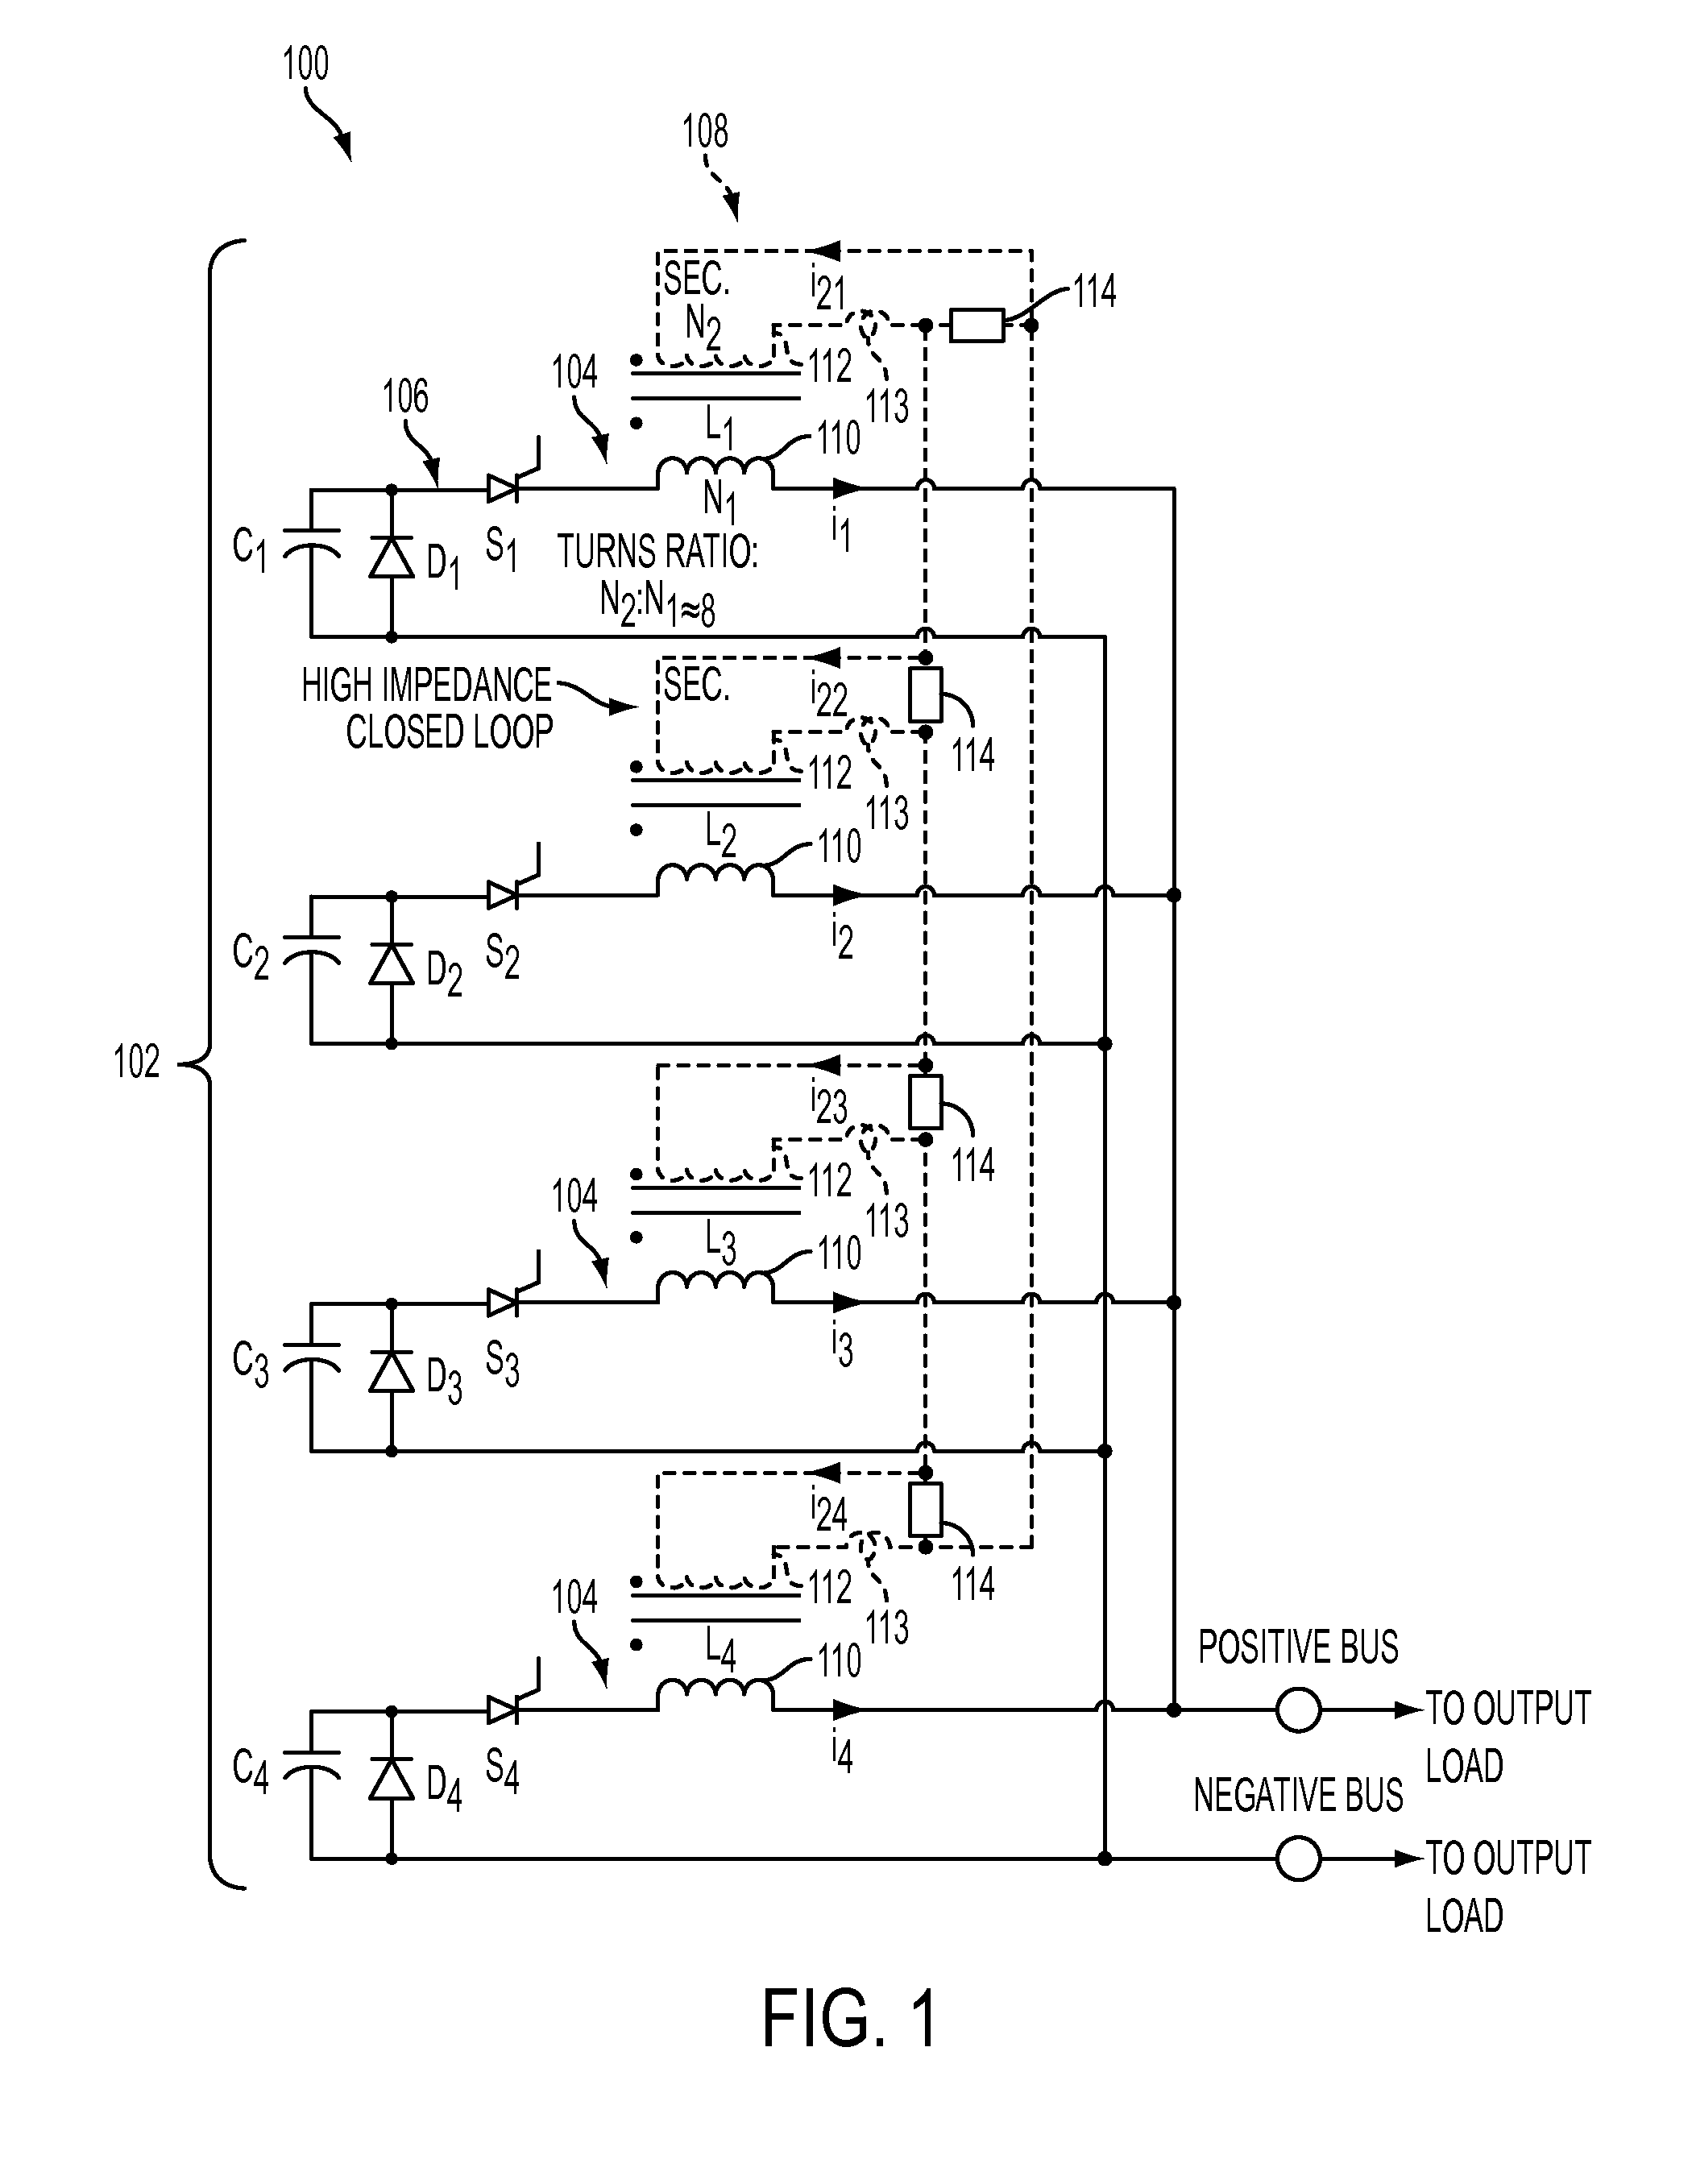 Electromagnetic DC pulse power system including integrated fault limiter